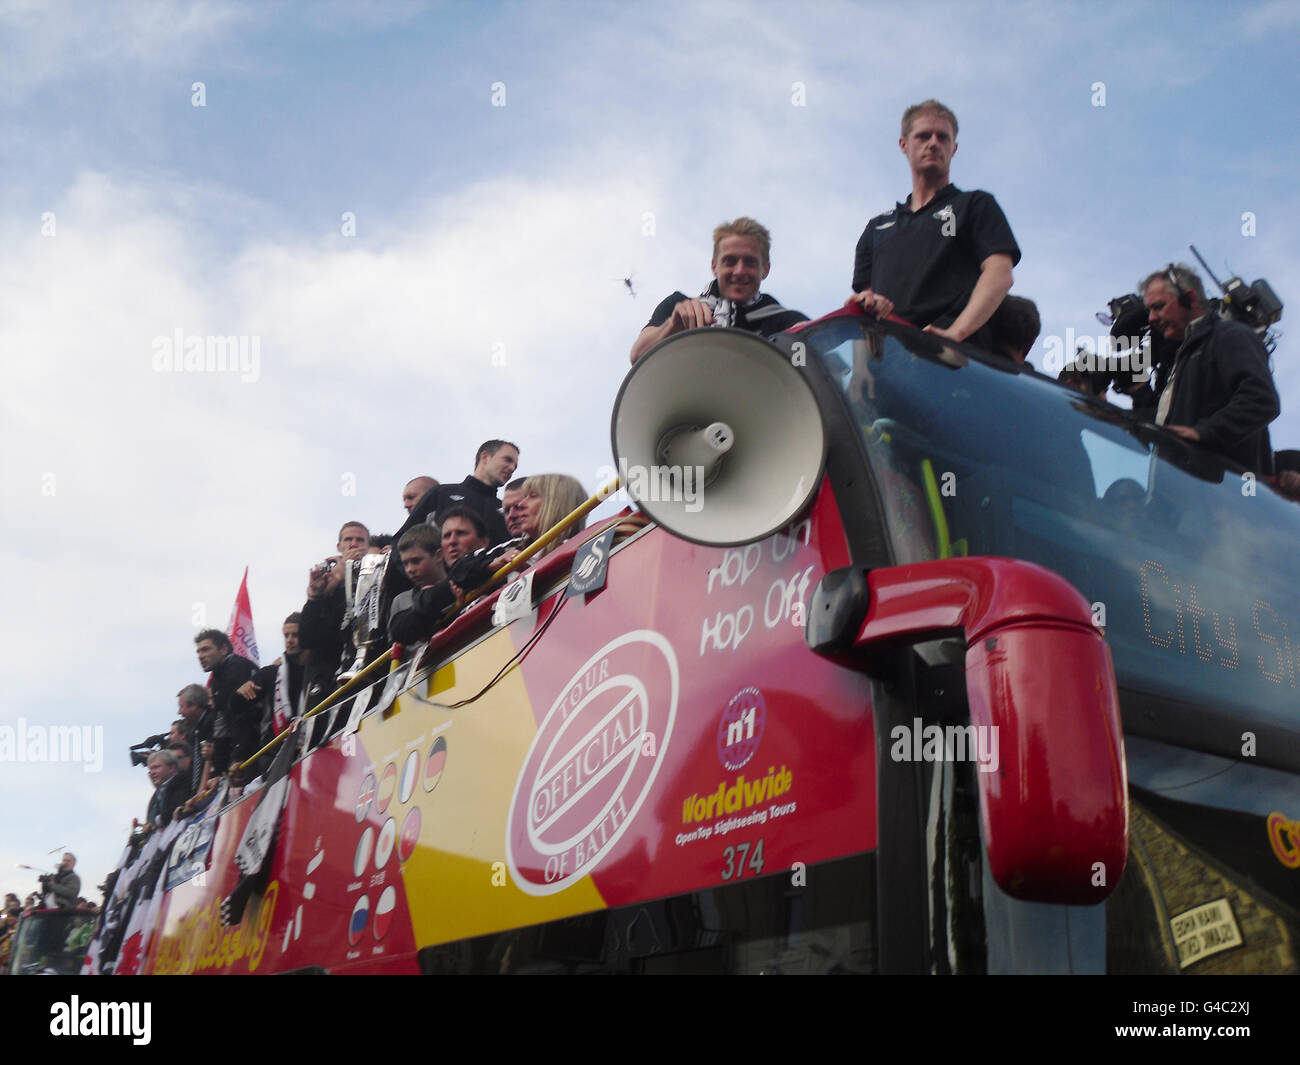 The Swansea City team on top of the bus after it arrived at Swansea Guildhall during the bus parade through Swansea. Stock Photo